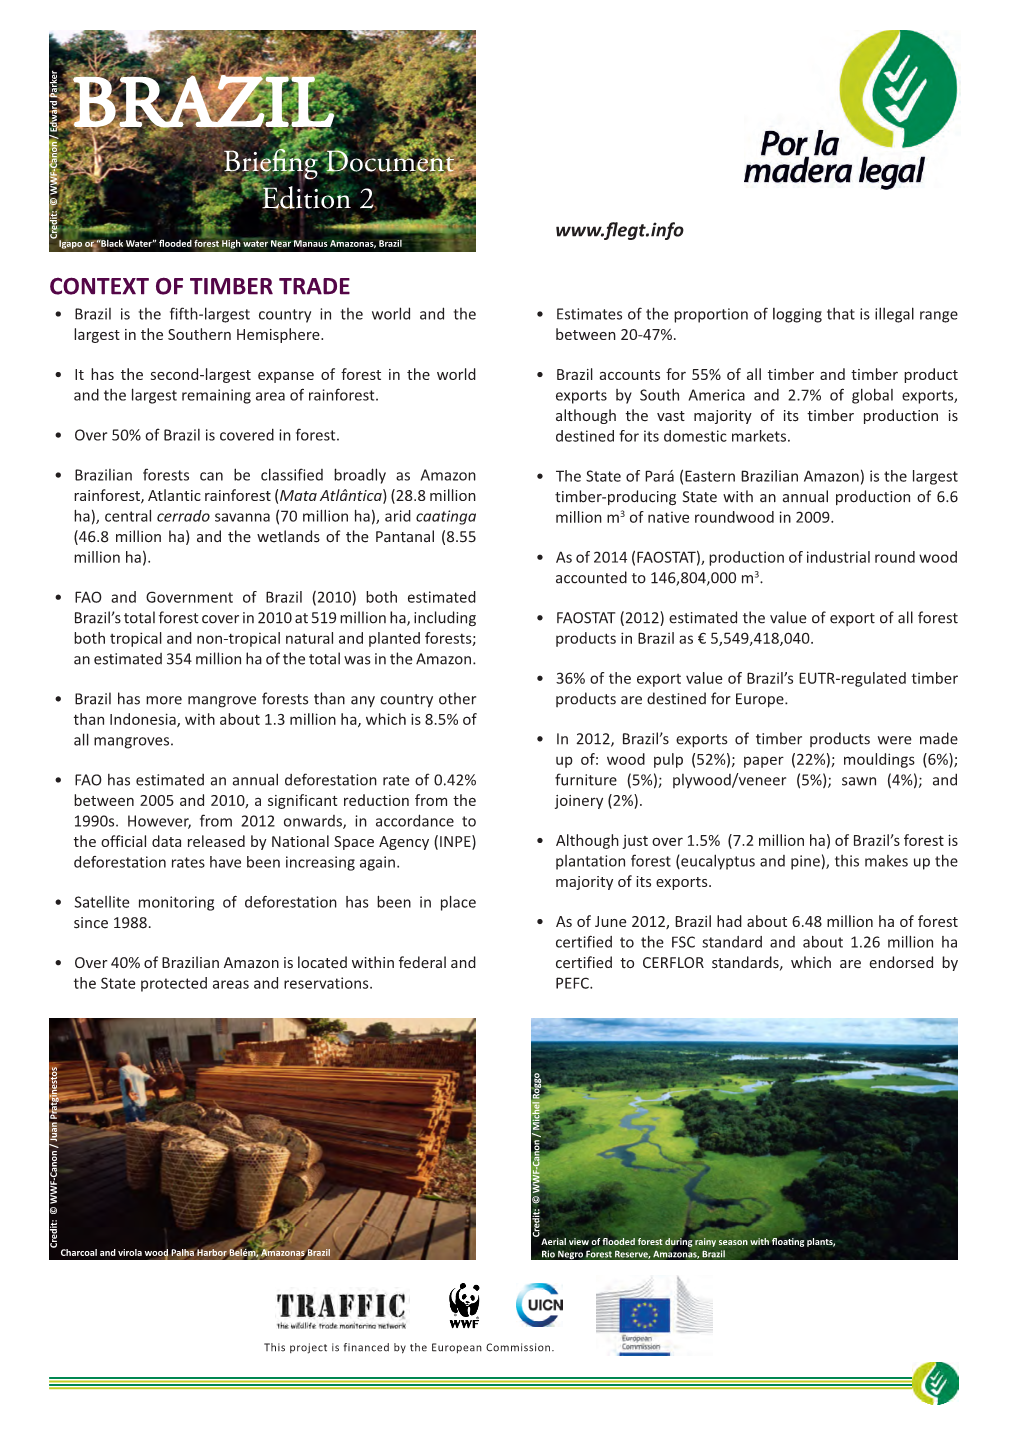 Briefing Paper on Timber Production in Brazil (PDF, 2.4